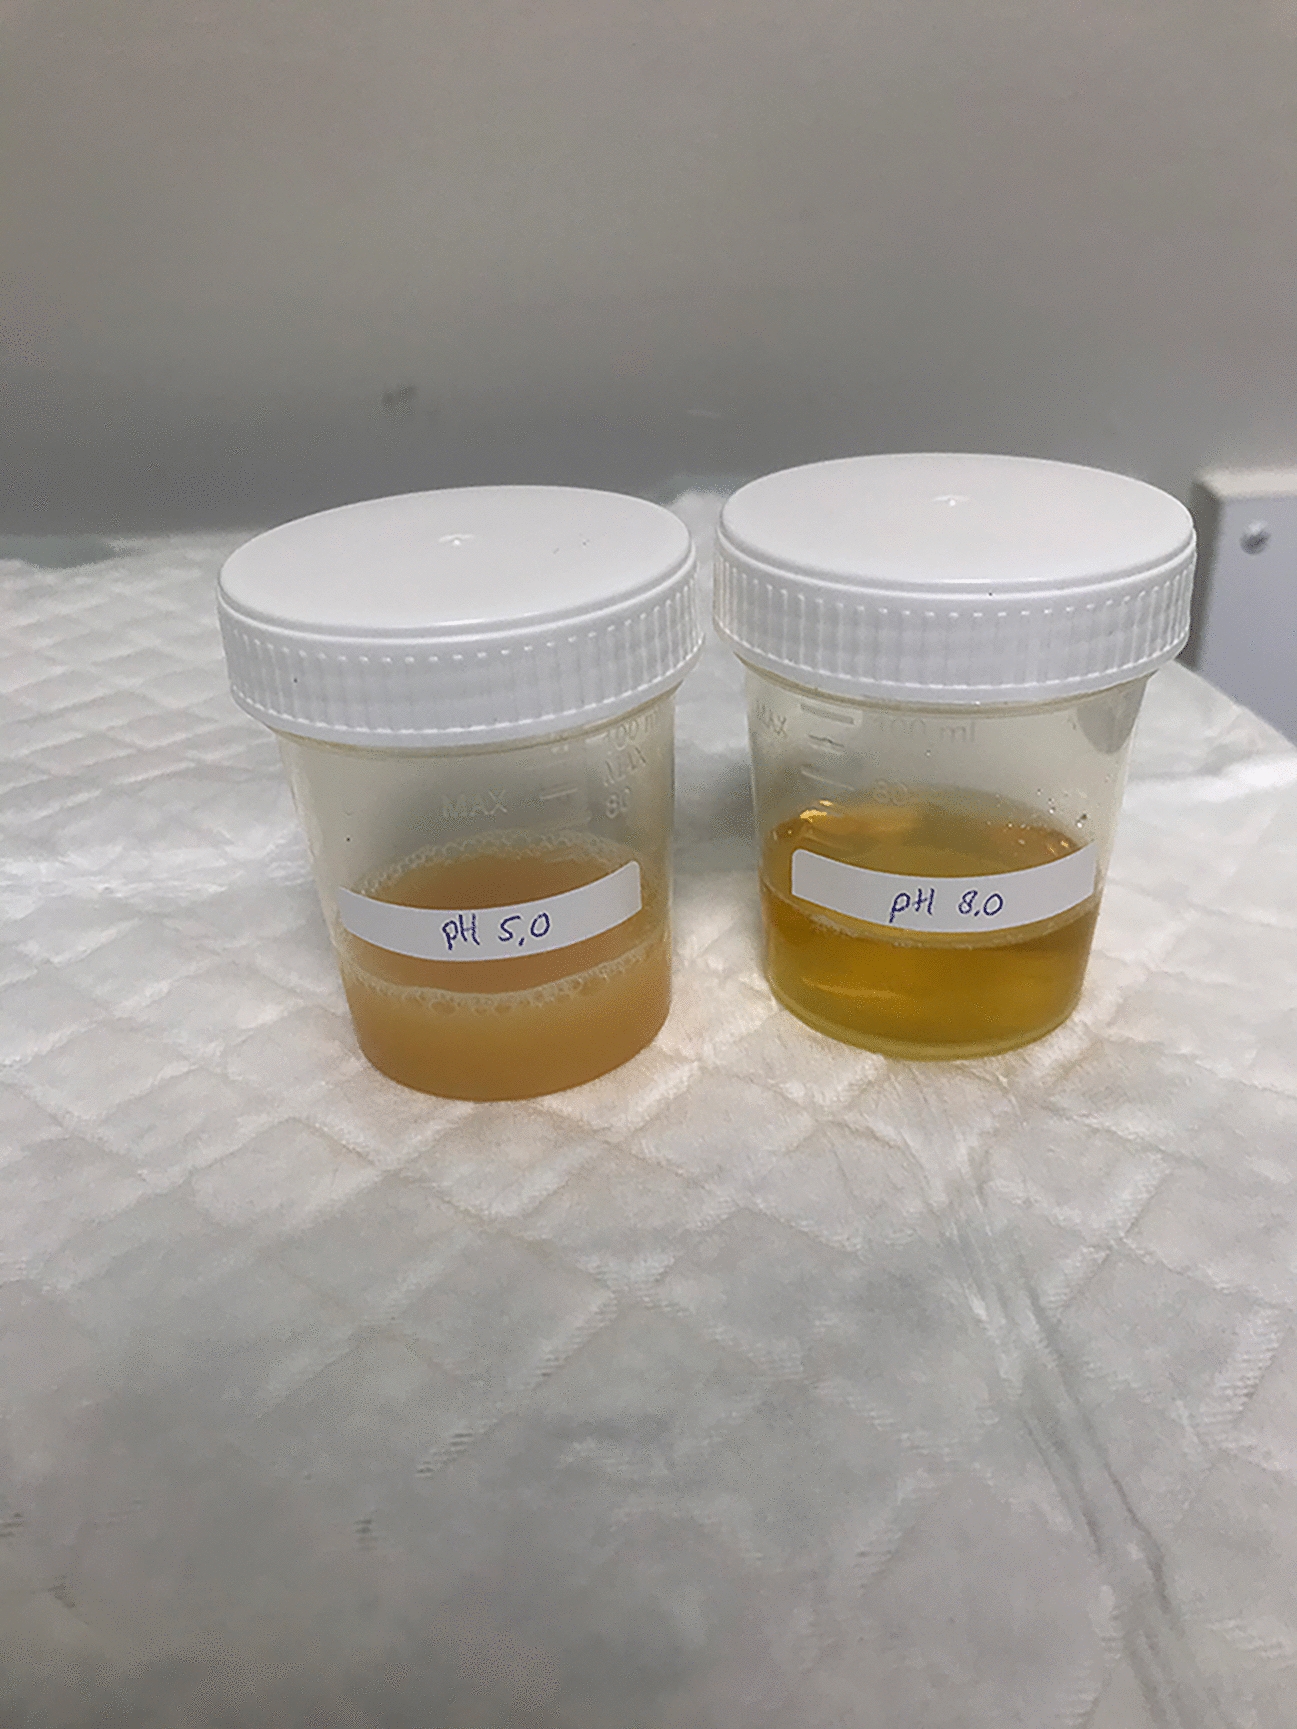 Intraoperative cloudy urine due to propofol-induced crystallization of uric acid